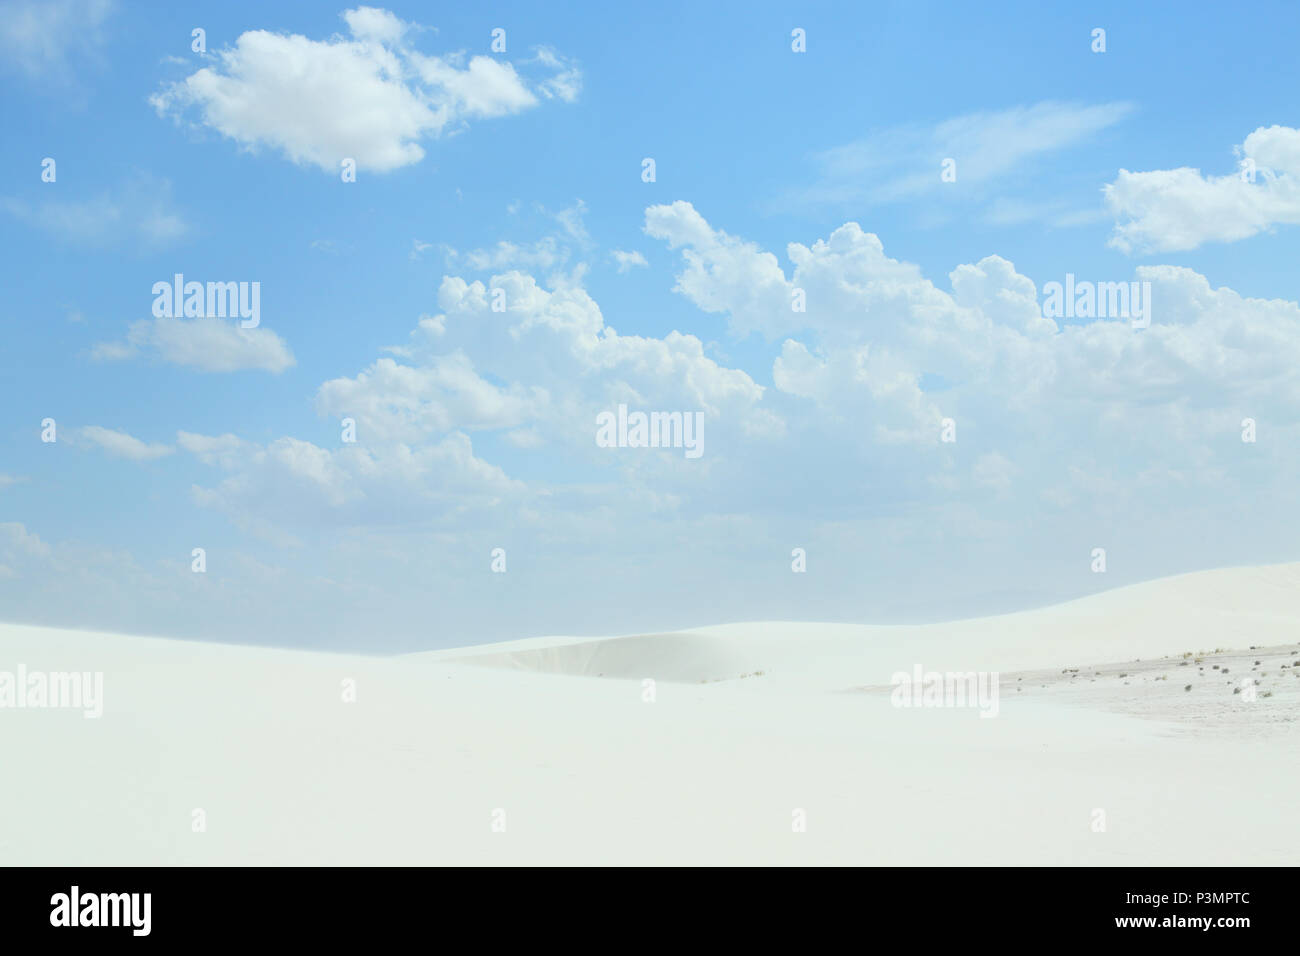 White sand dunes with wind formed ripples on a day with blue skies and clouds Stock Photo